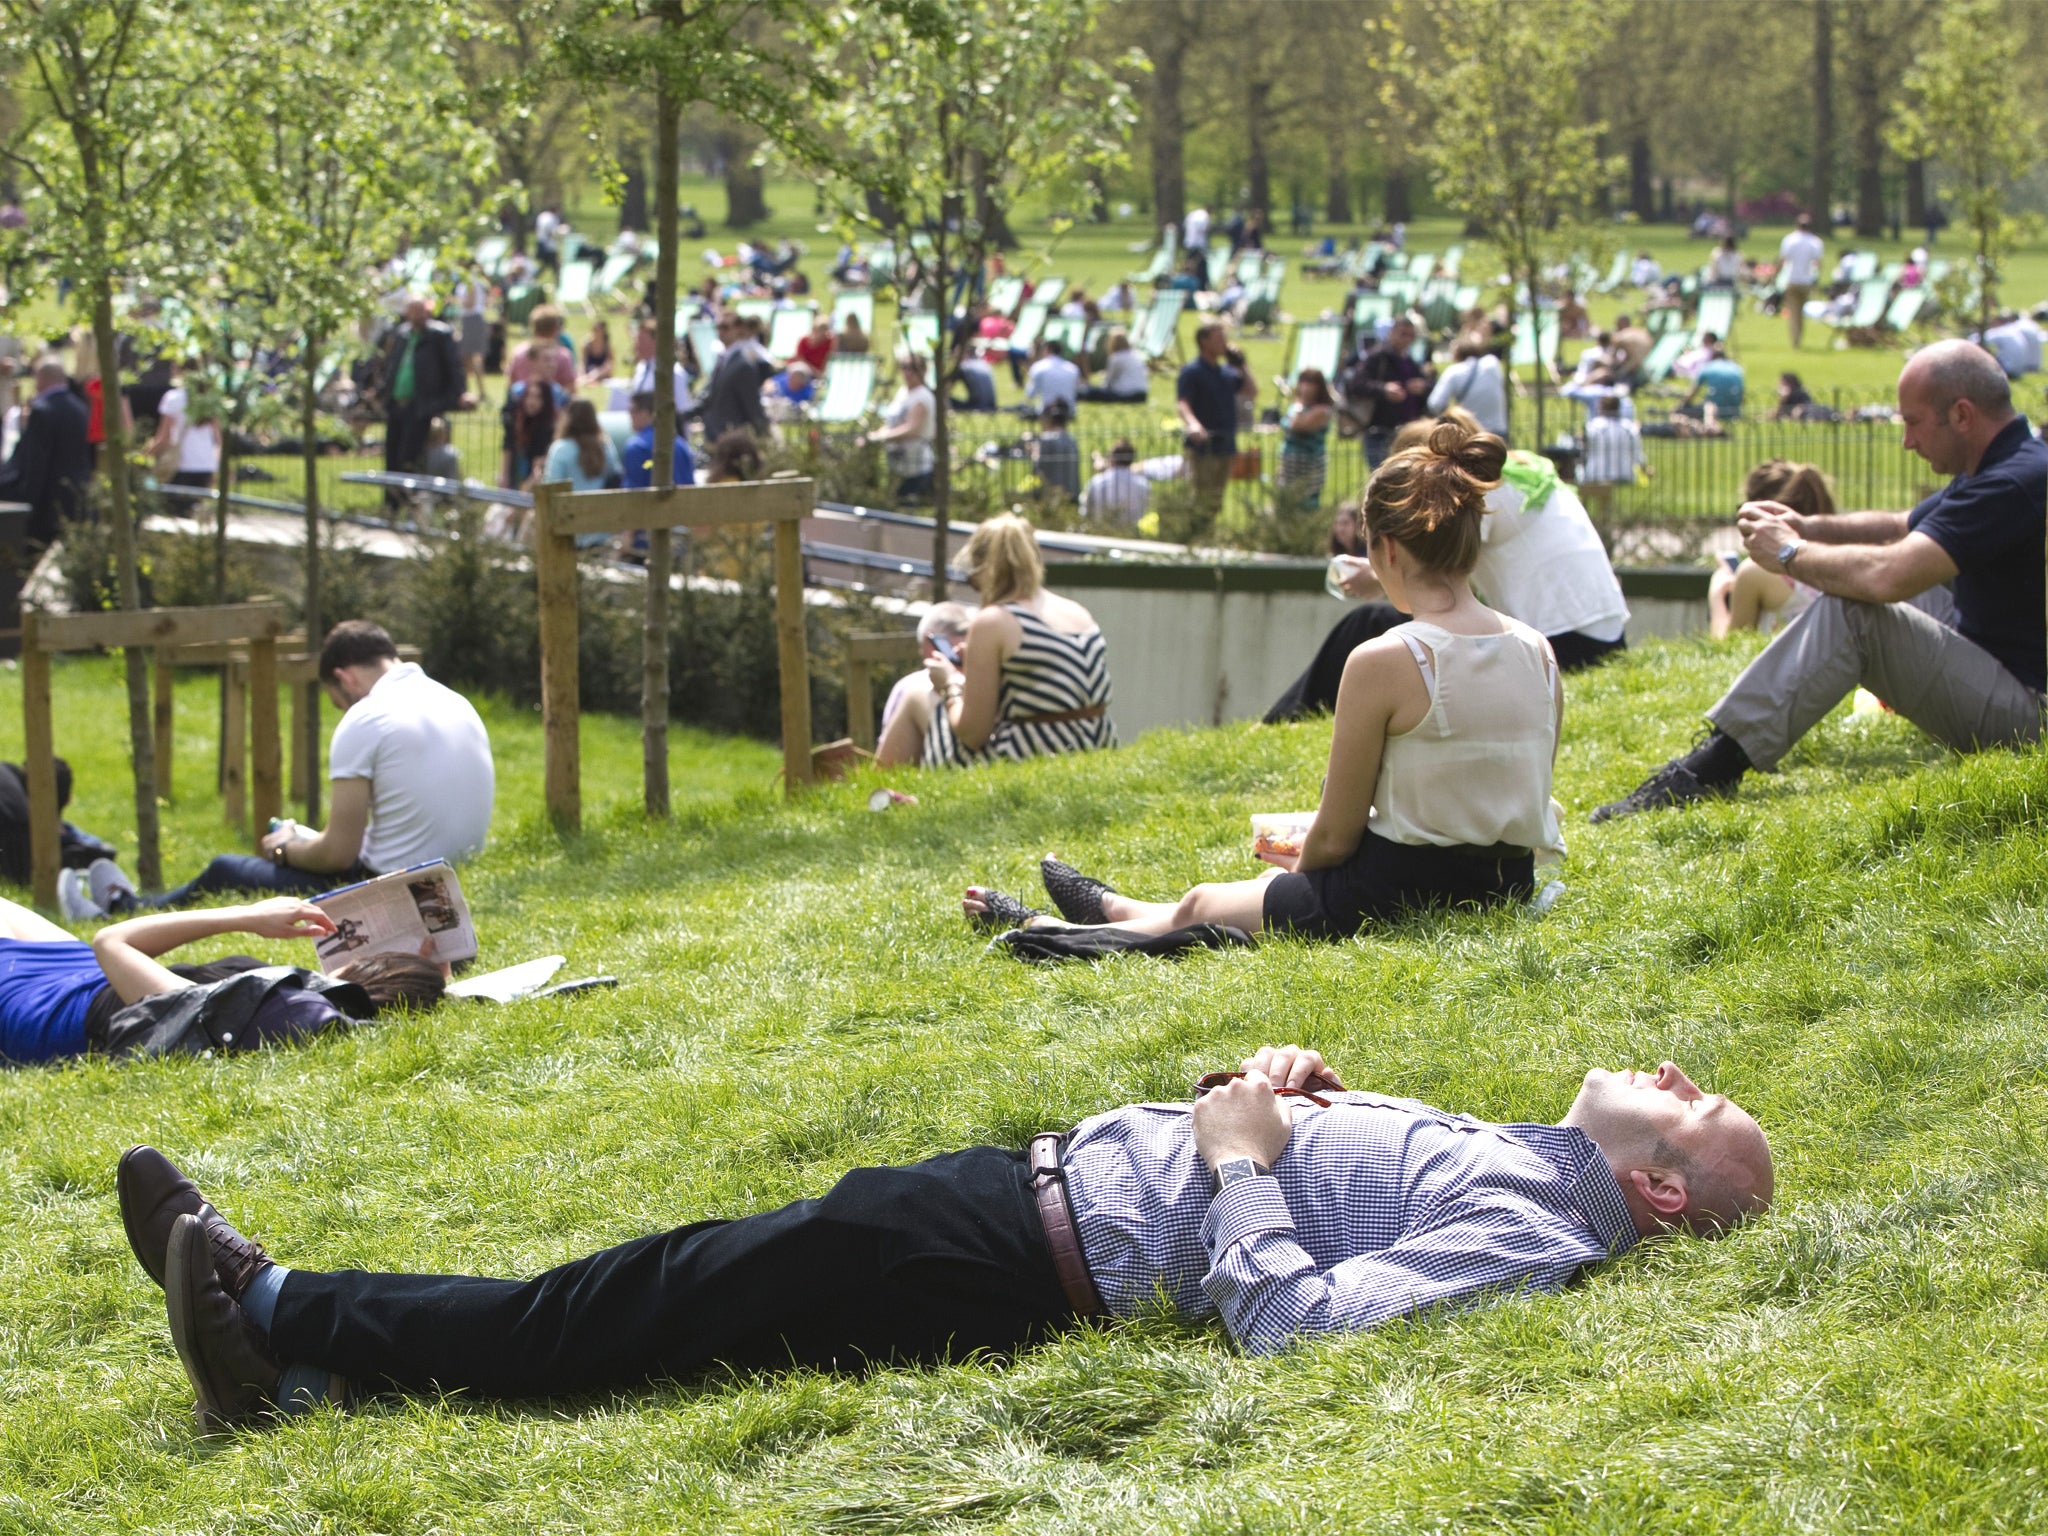 Londoners sunbathing during their lunch hour in Green Park